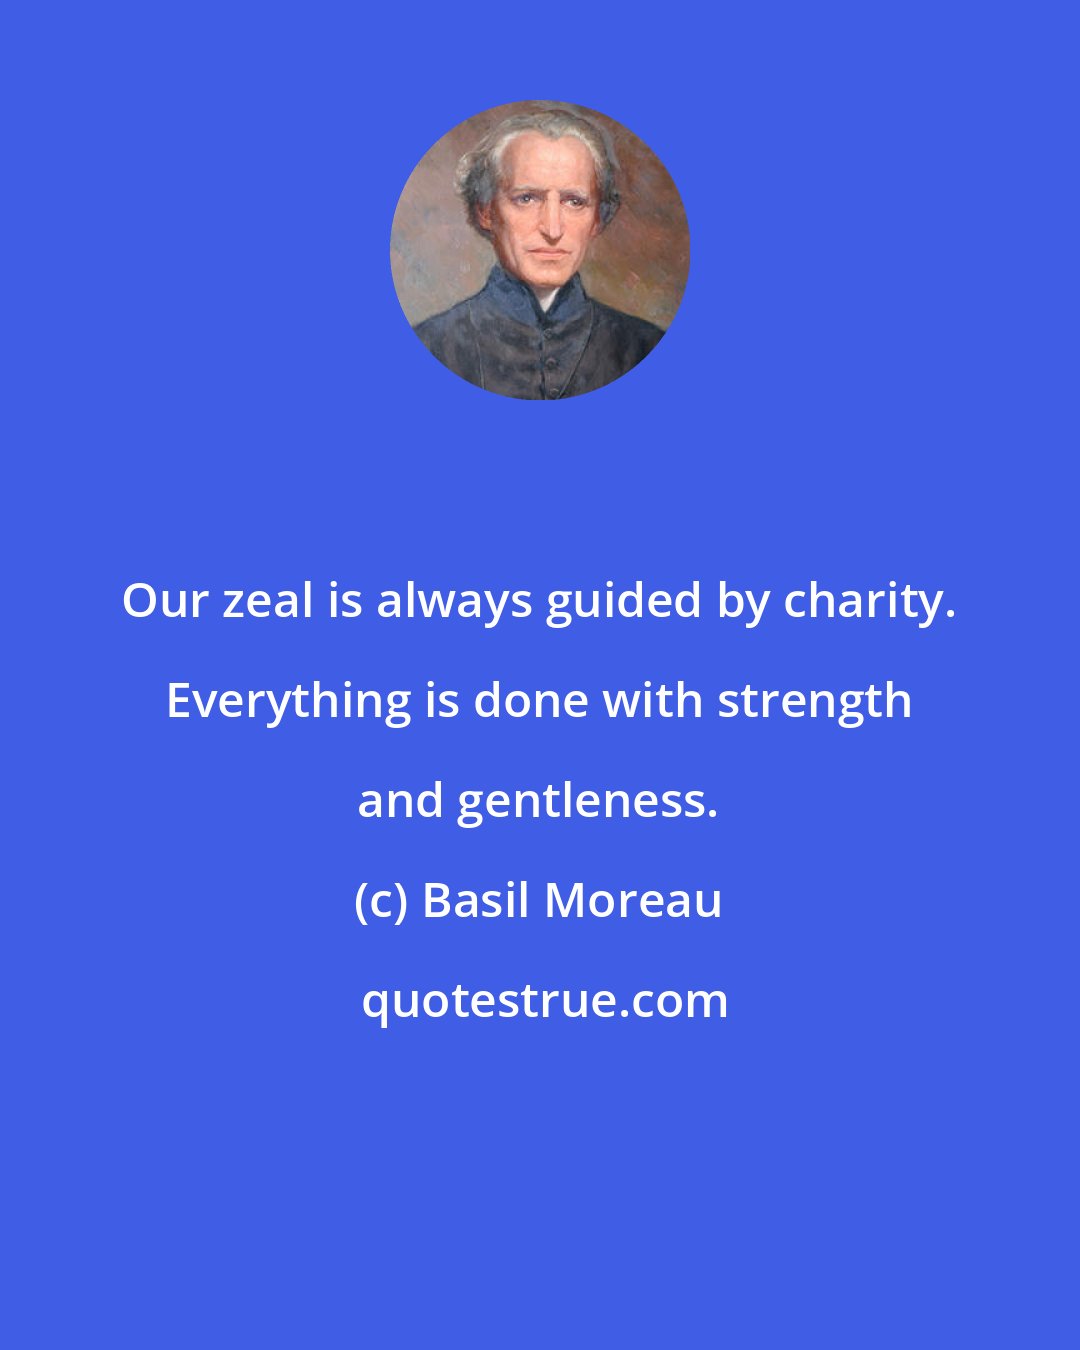 Basil Moreau: Our zeal is always guided by charity. Everything is done with strength and gentleness.